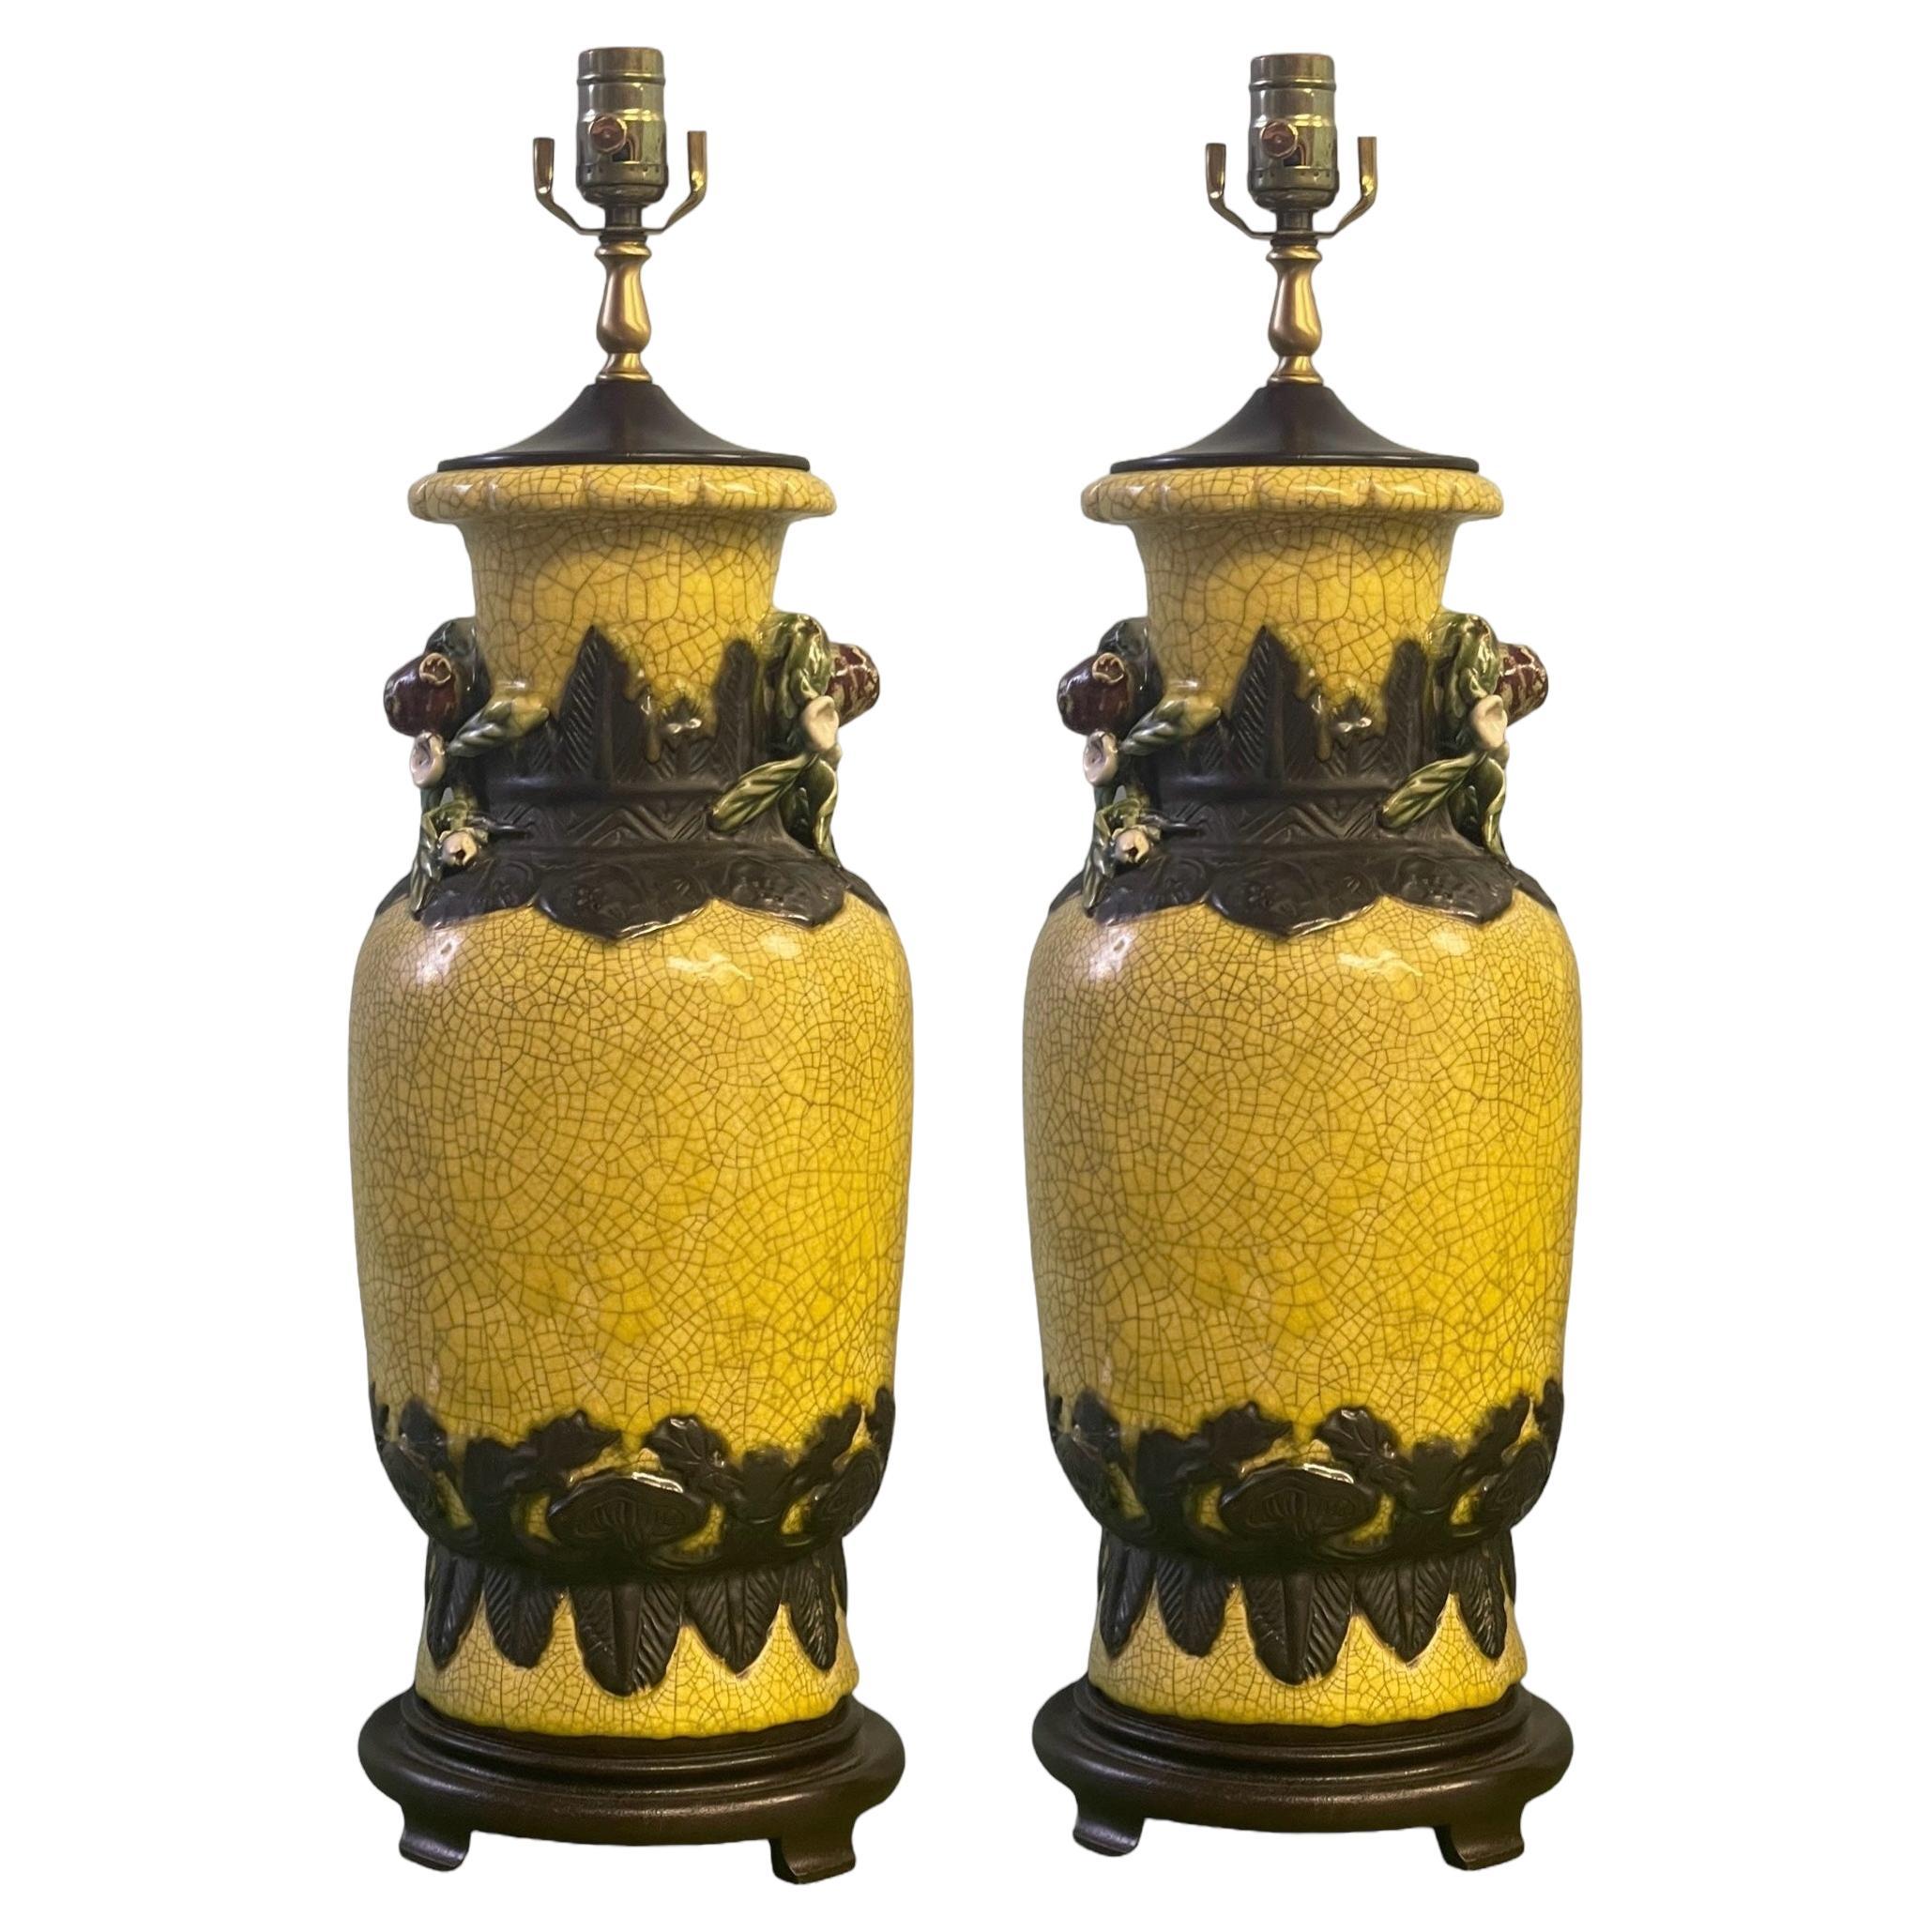 Chinese Export Style Jar / Vase Form Crackle Glaze Table Lamps W/ Fruit - Pair